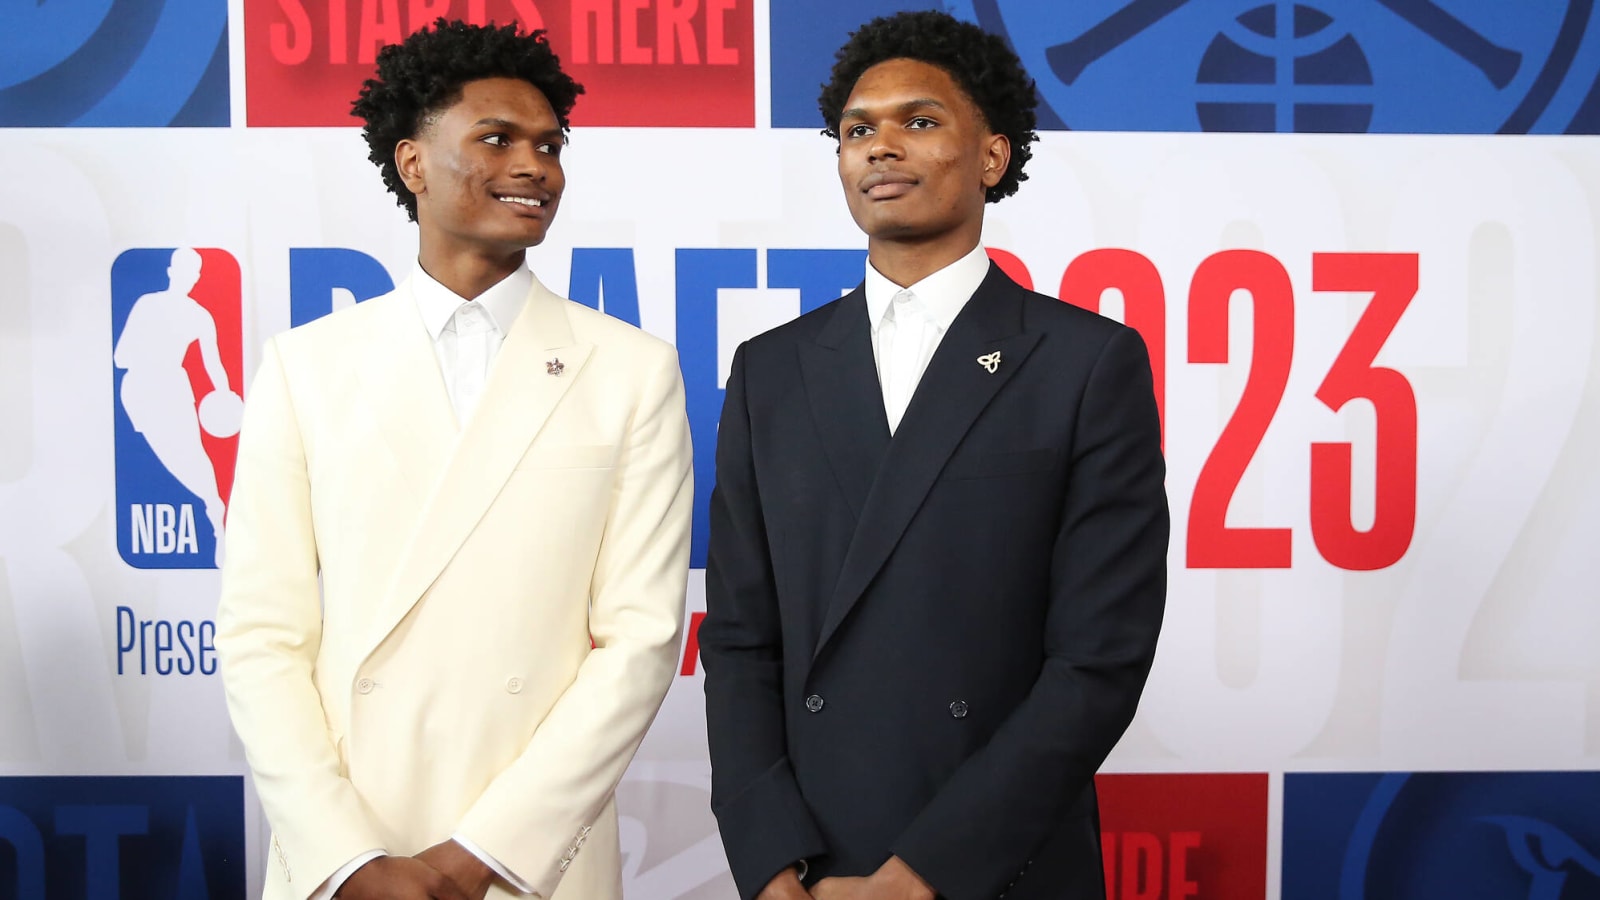 Rare NBA Draft feat with twins not a first in sports